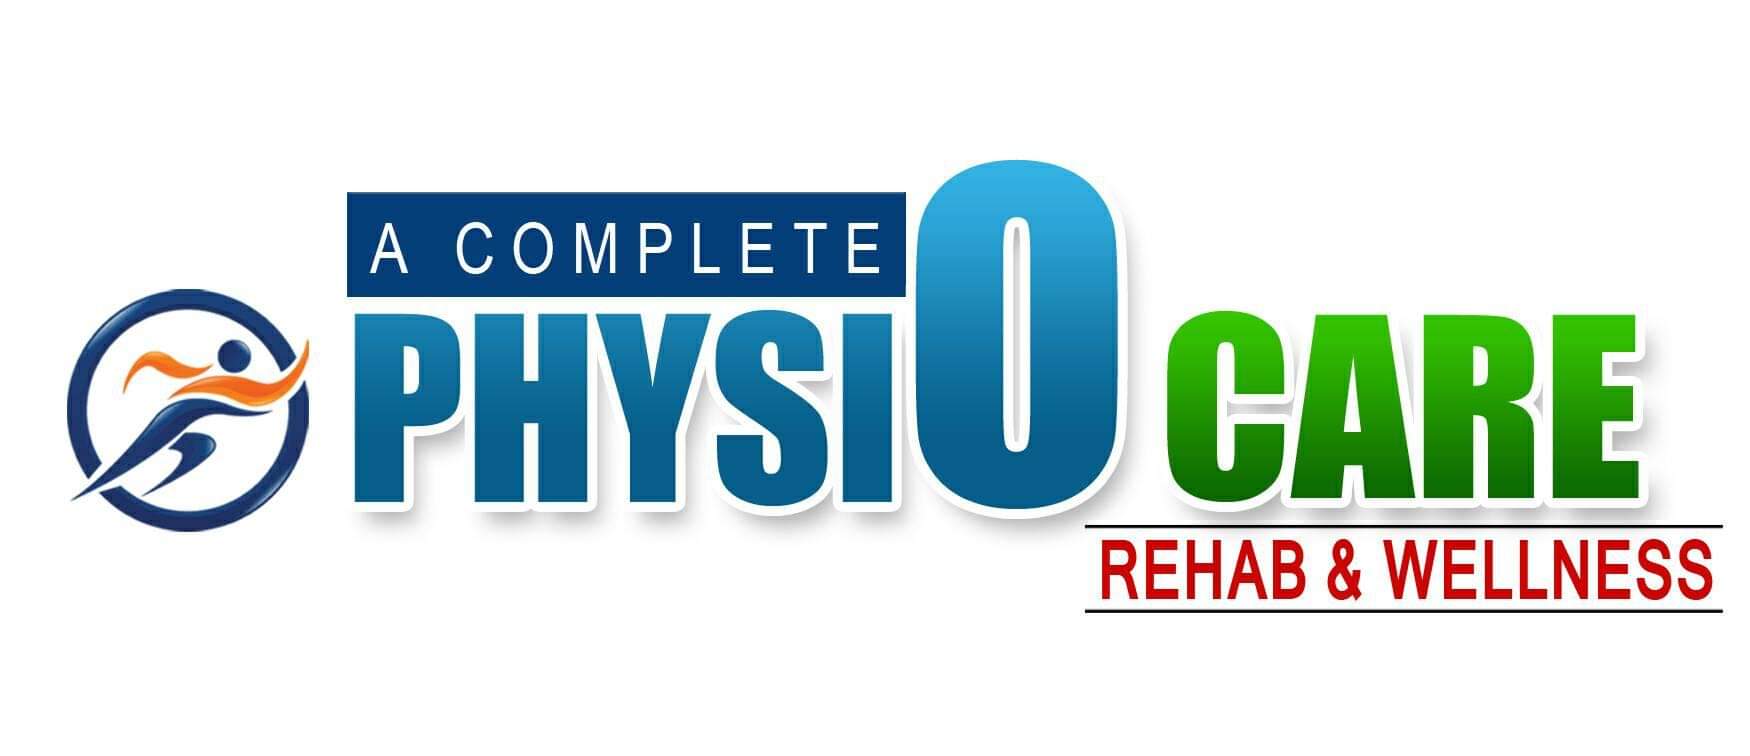 A Complete Physio Care Rehab & Wellness, Sonepur